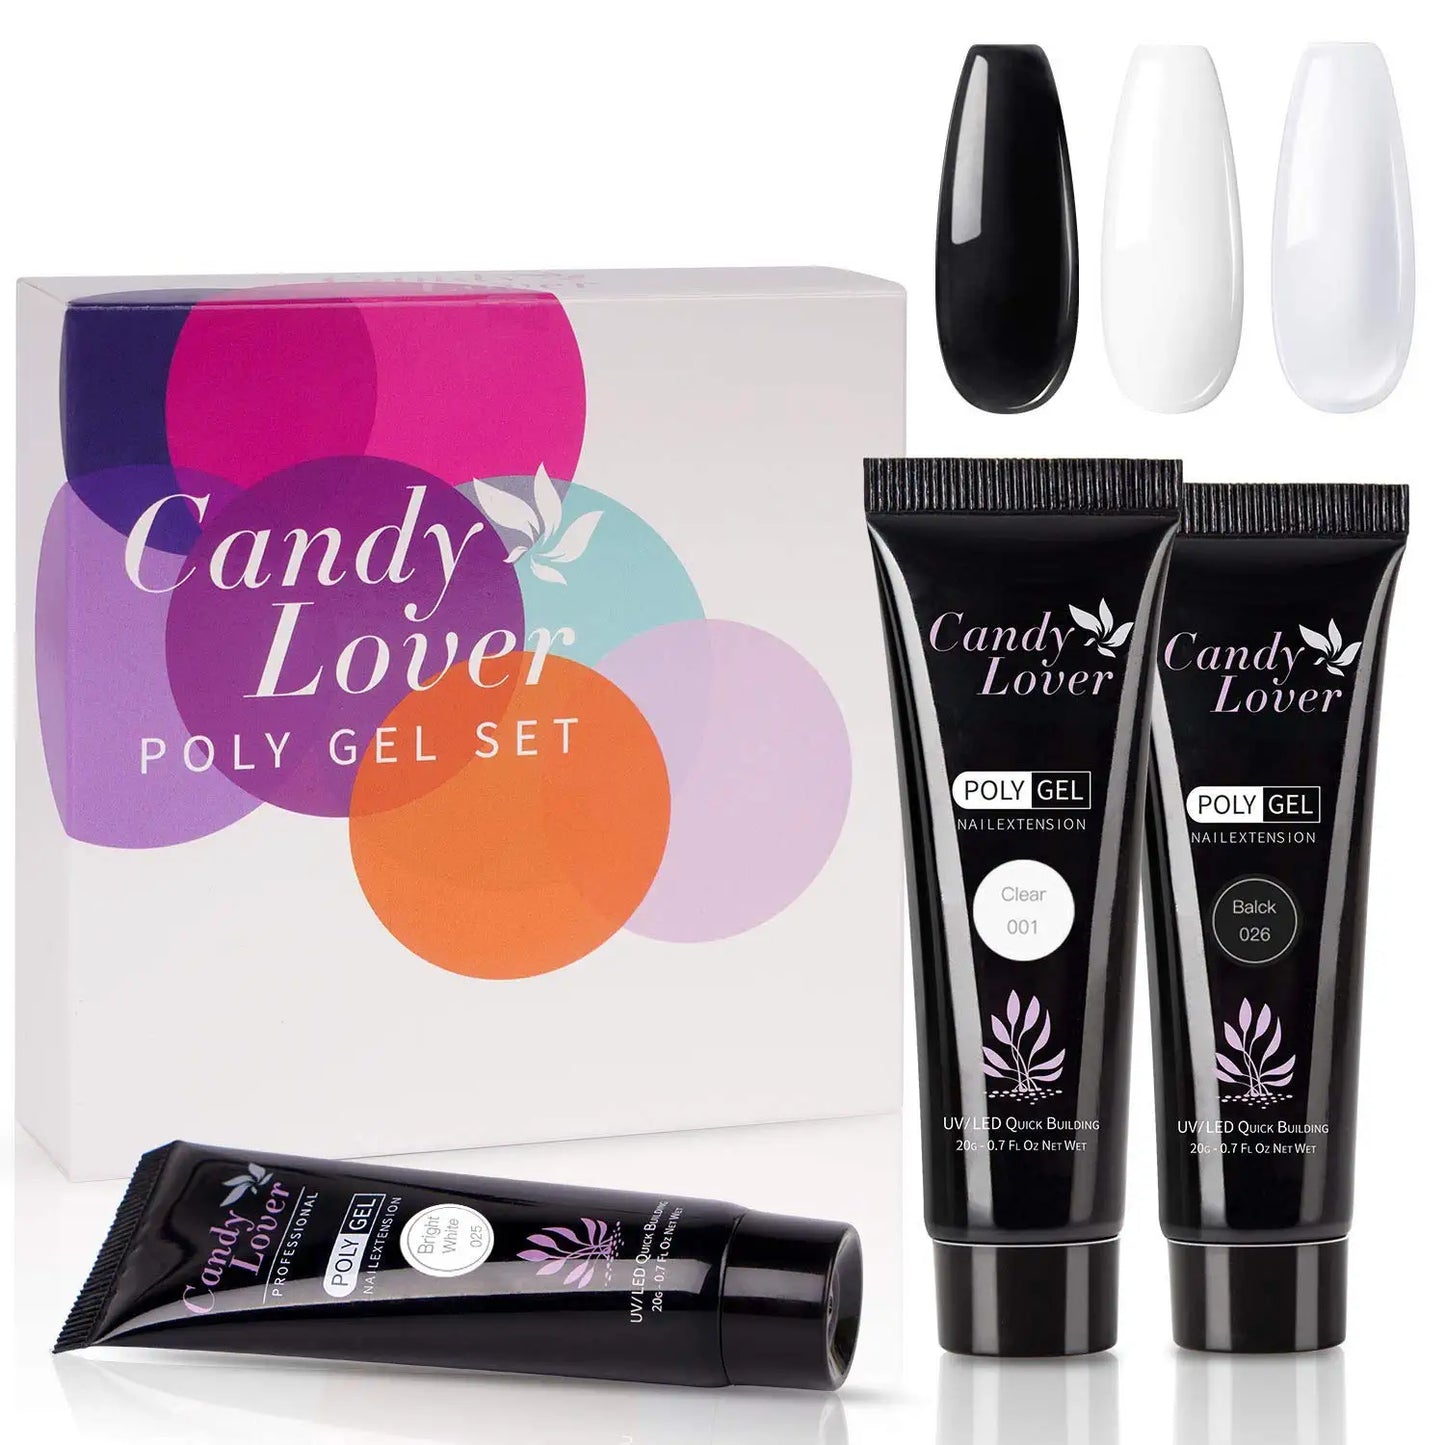 Poly Gel Nail Polish Set - Candy Lover Black White Clear 3 Popular Colors